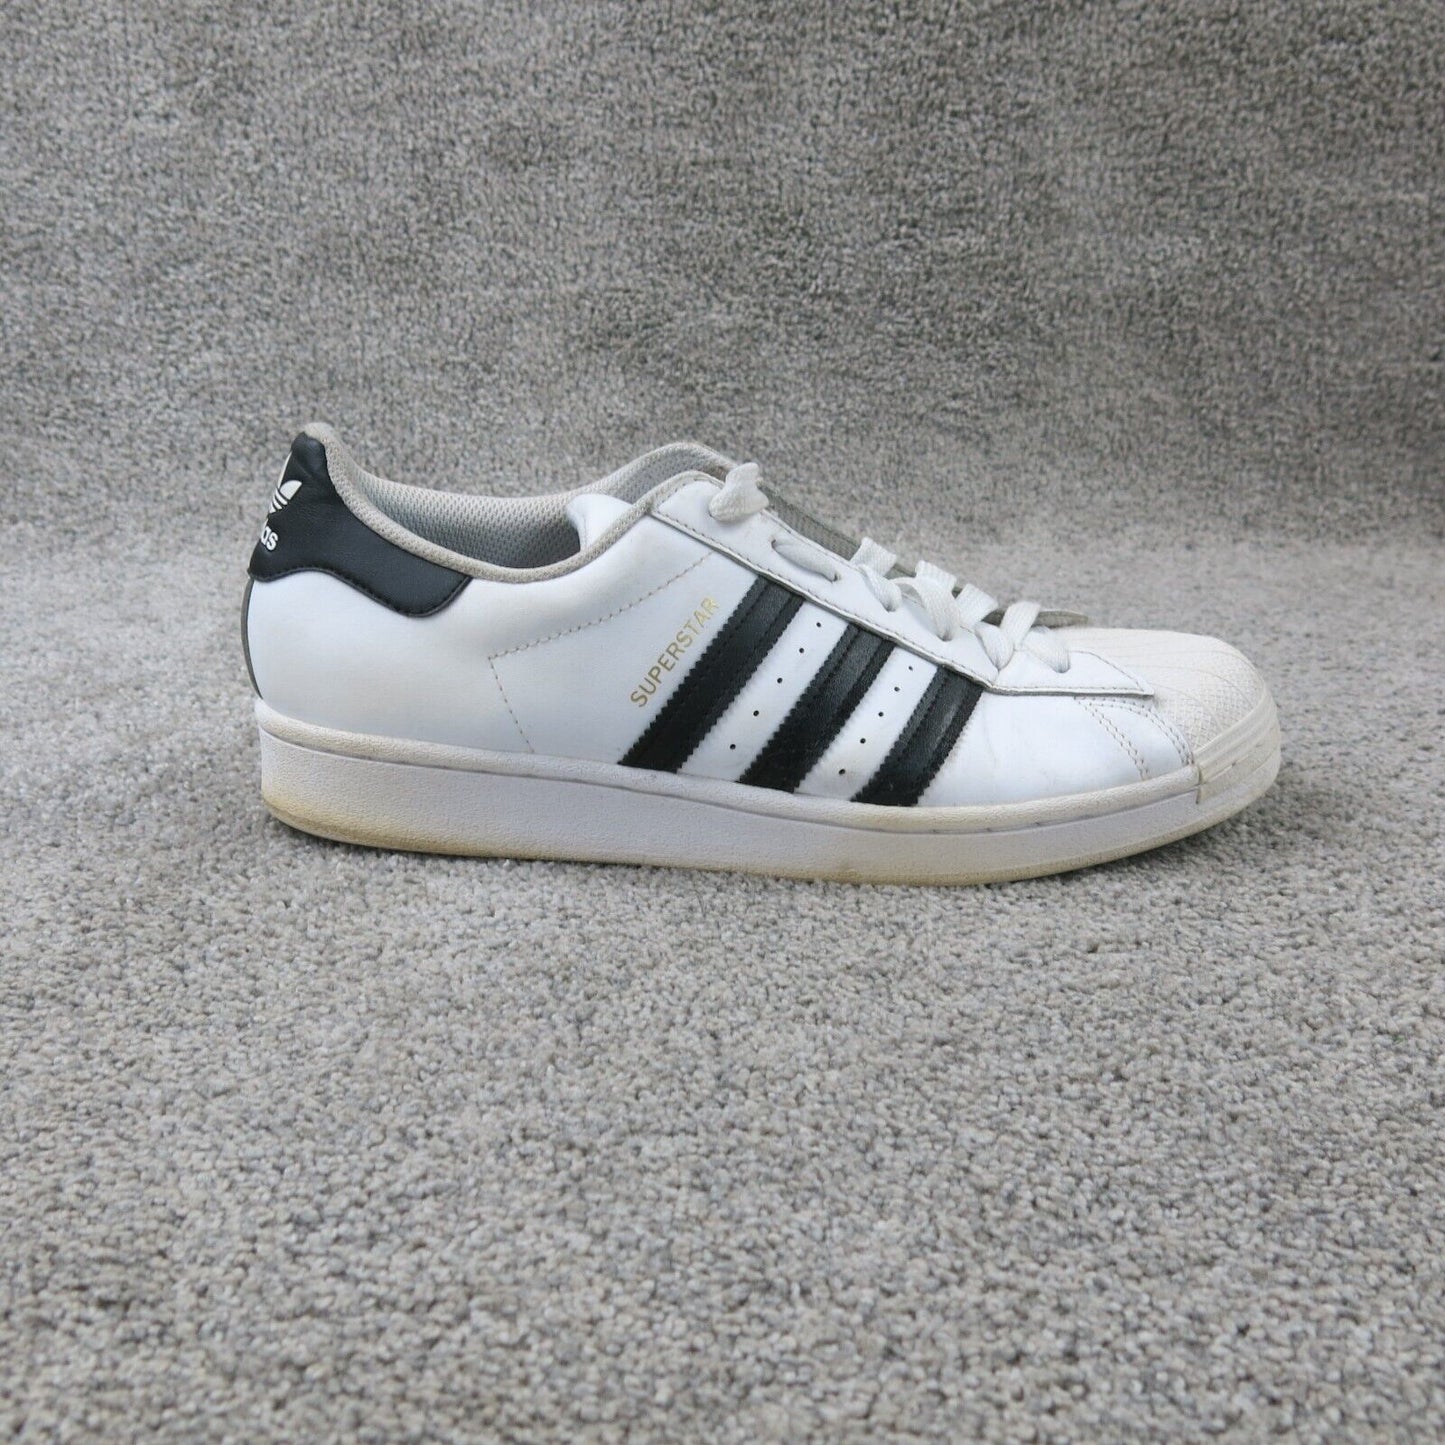 Adidas Mens Superstar 789006 White Black Leather Stripes Sneakers Shoe Size 10.5